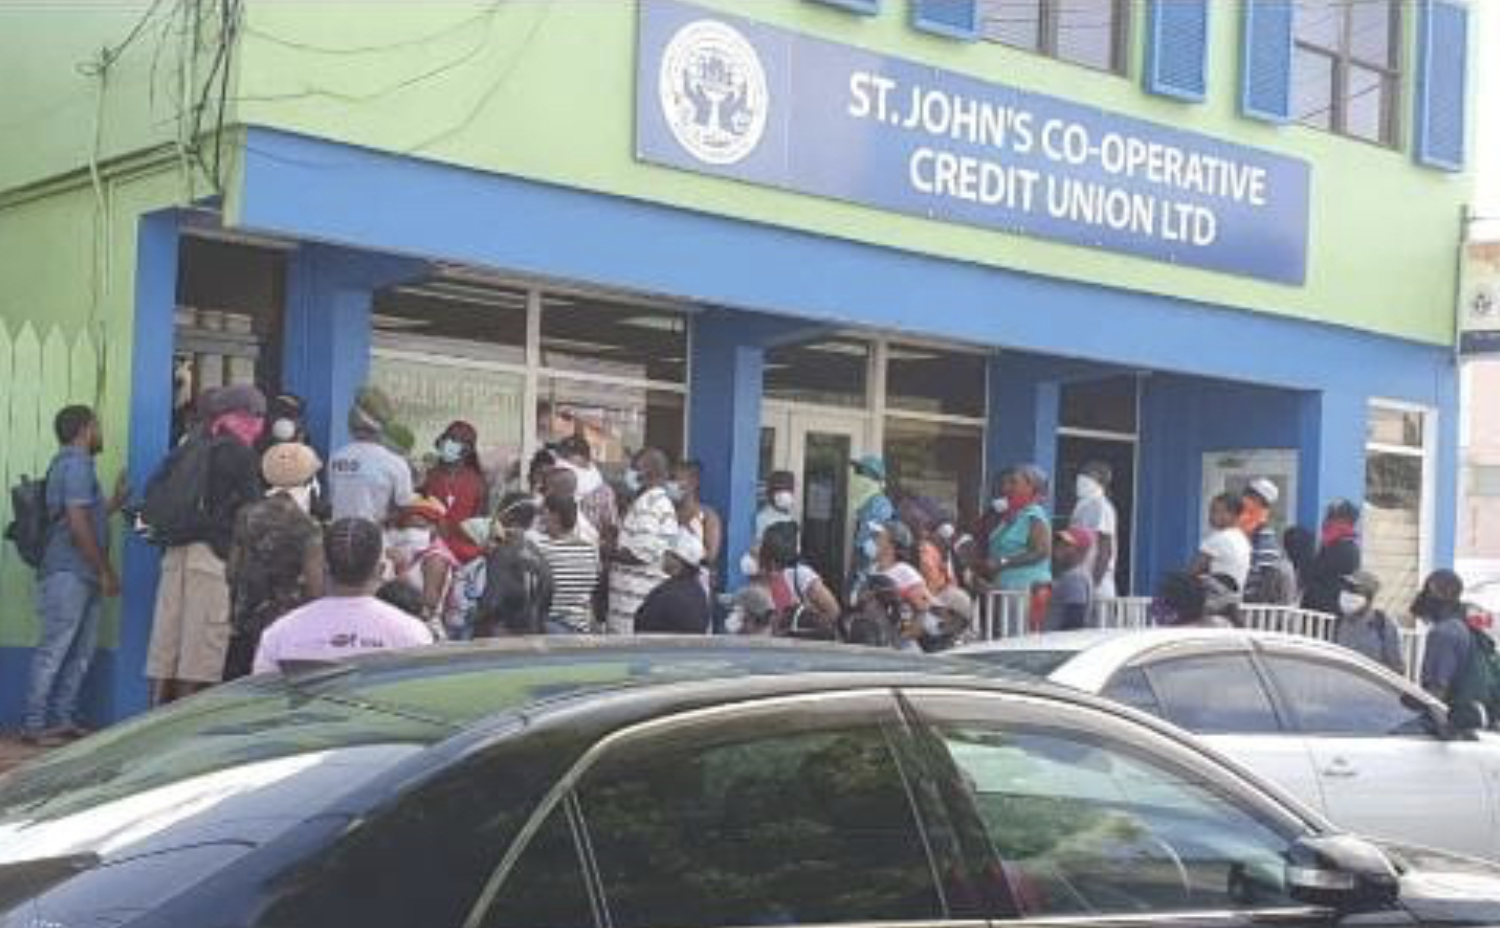 SJCCU’s Head Office remains closed because of COVID